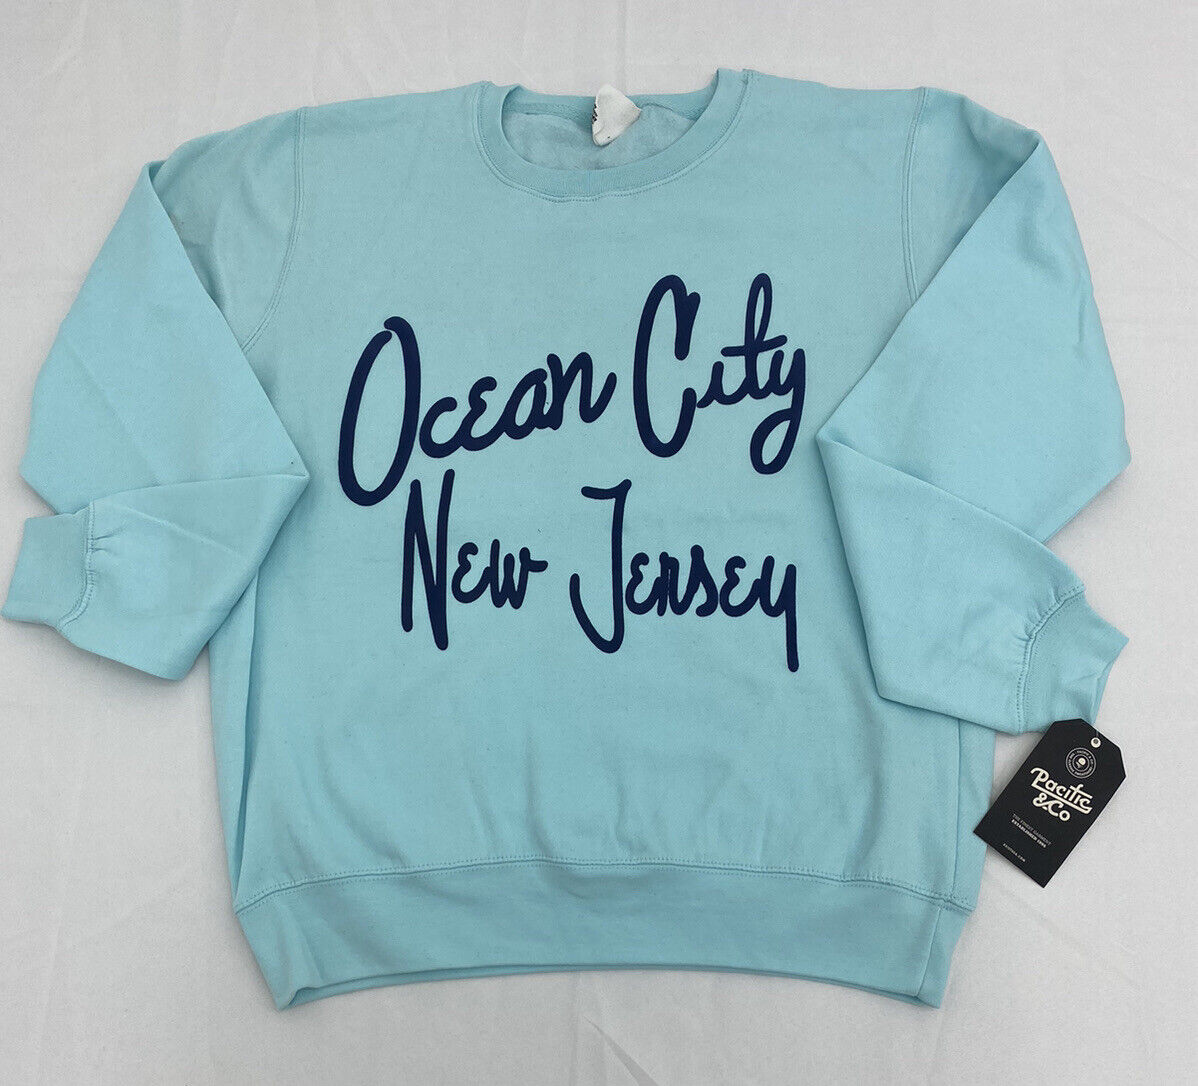 Pacific & Co Ocean City New Jersey Seablue Sweatshirt Adult Size Large New